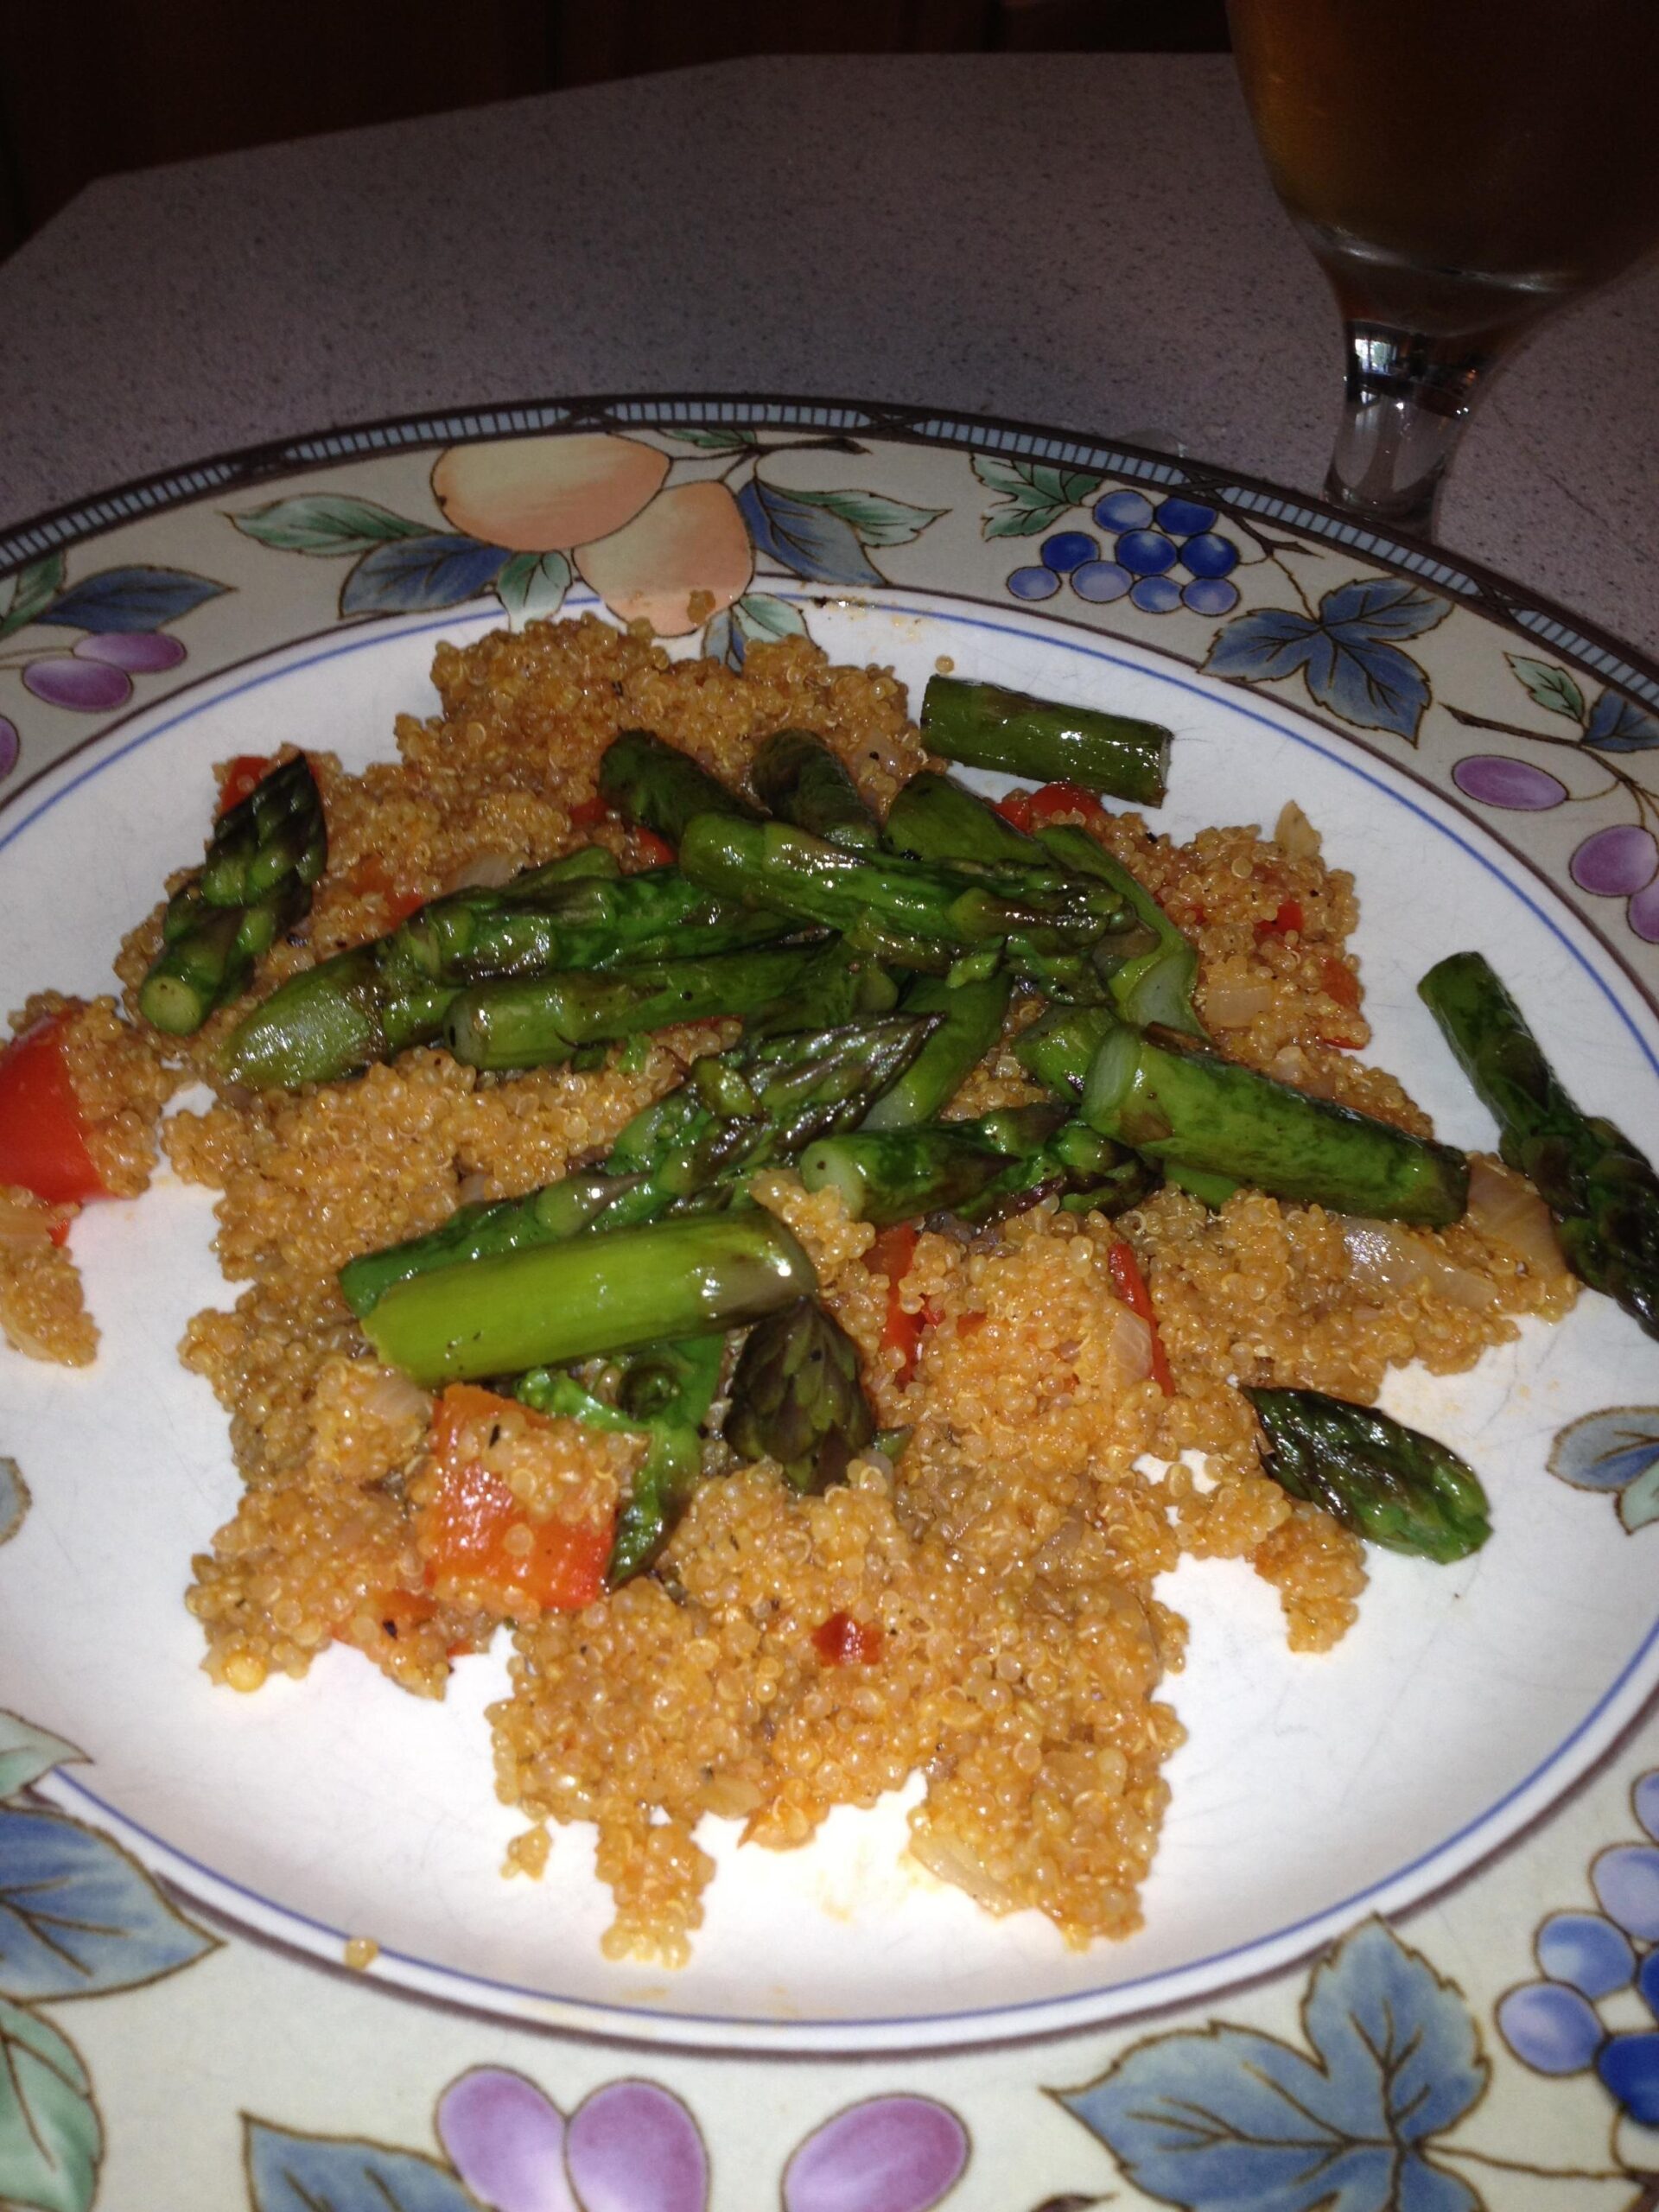 Heavenly Quinoa With Asparagus (Gluten-Free and Vegan)